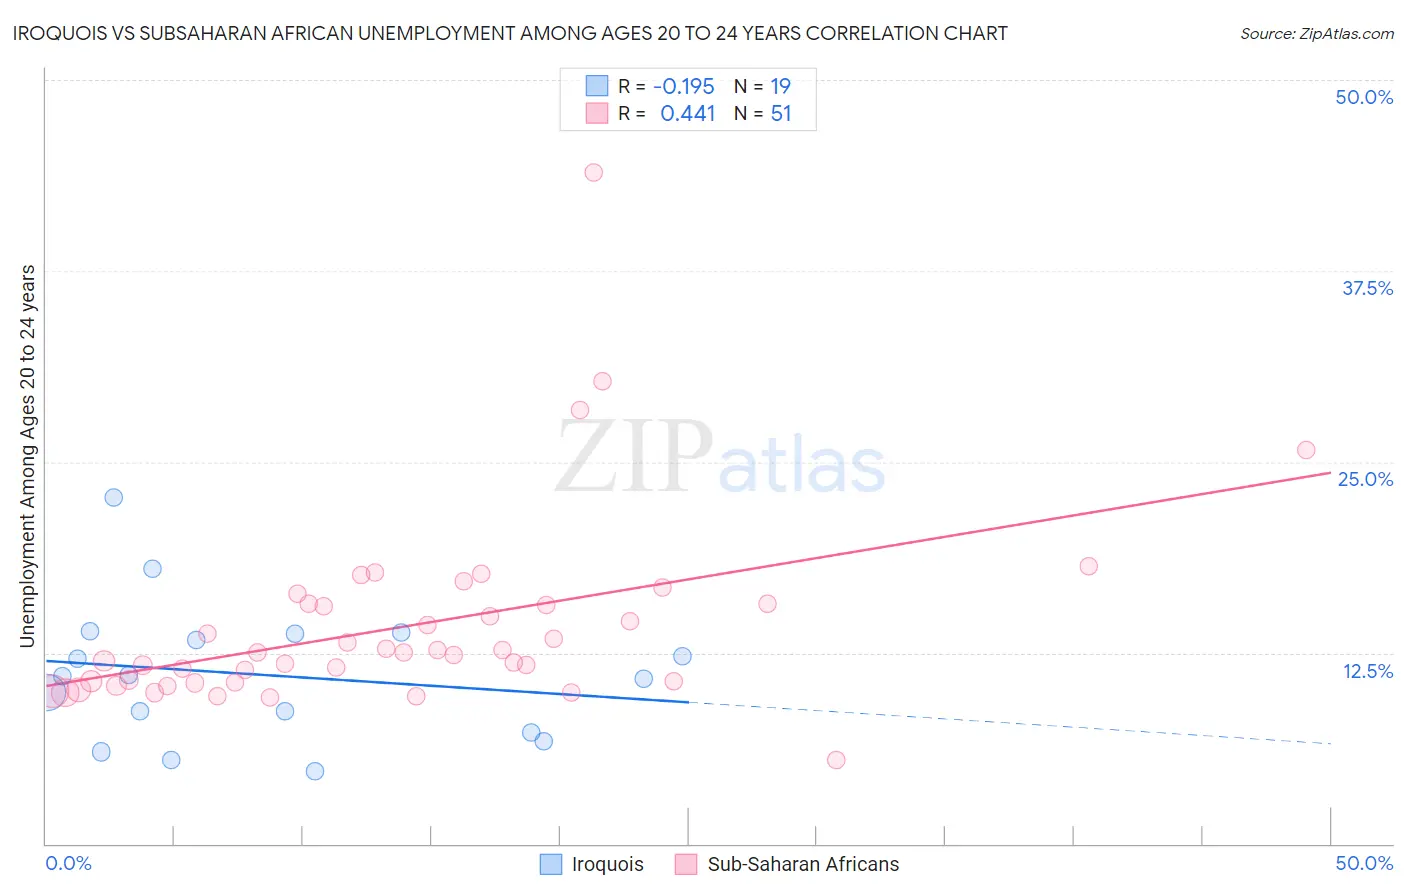 Iroquois vs Subsaharan African Unemployment Among Ages 20 to 24 years